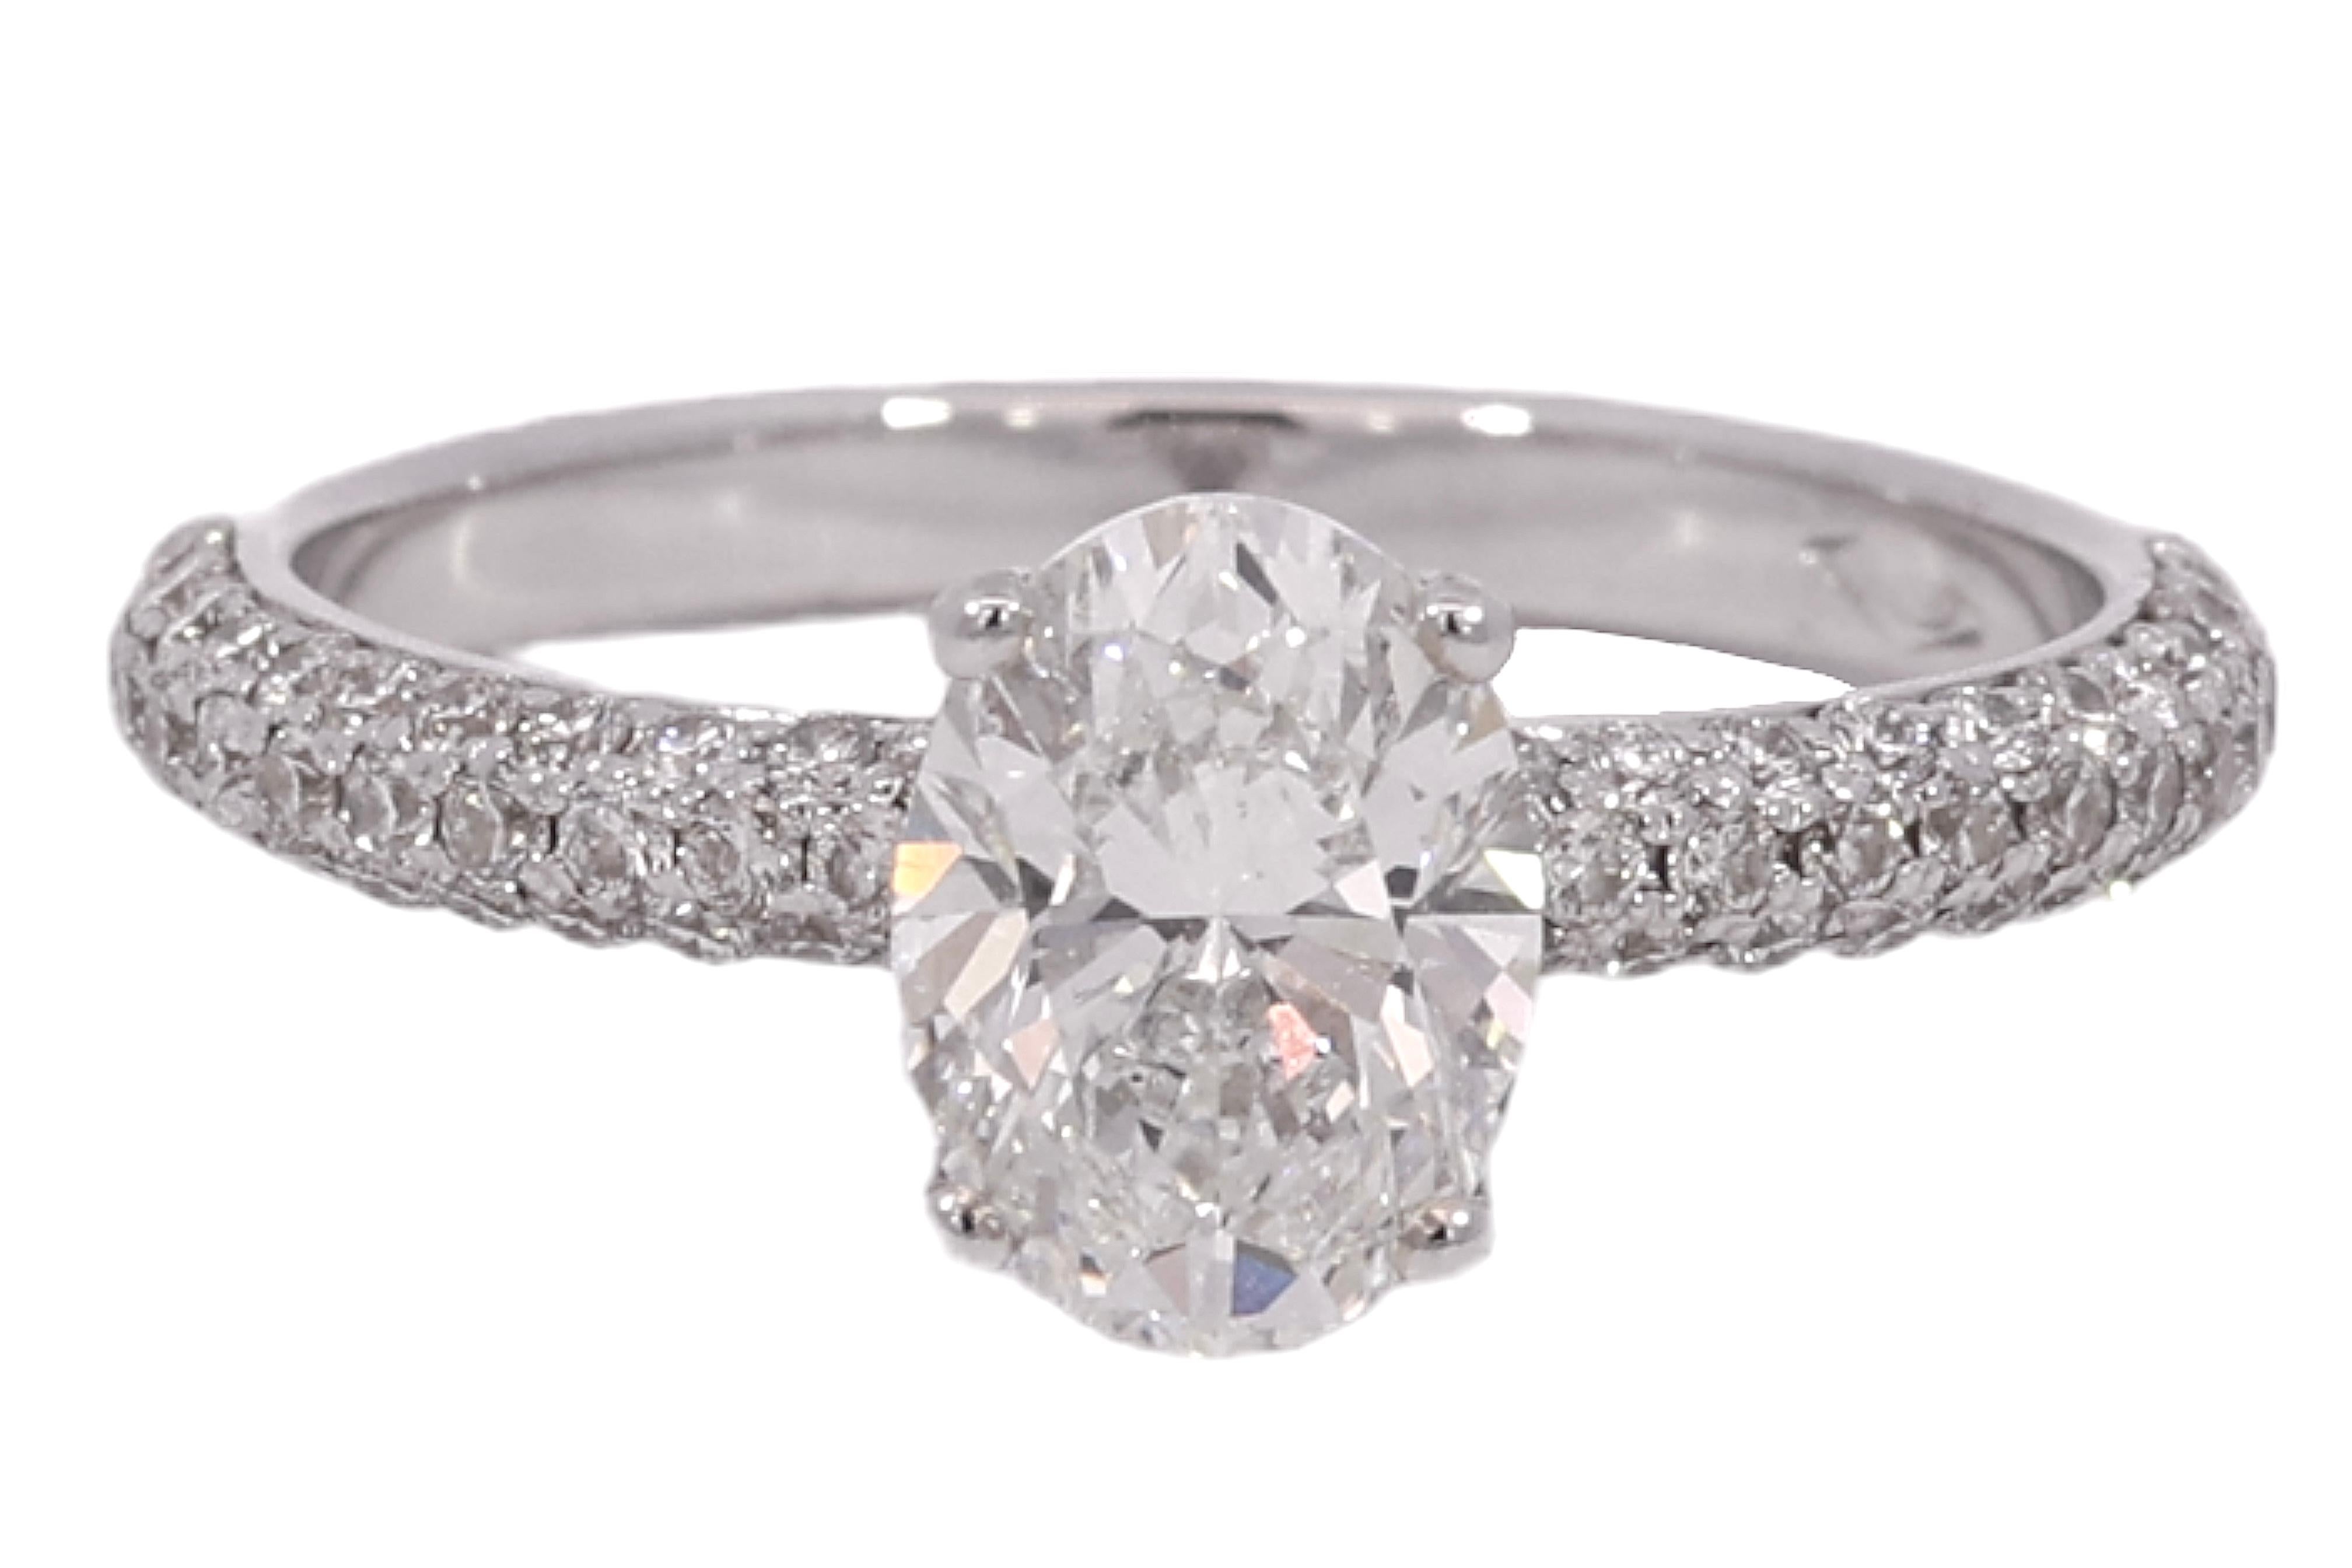 GIA Certified Magnificent 18 kt. White Gold Engagement Ring With 1 ct. F VS Centre Diamond and 0.70 ct. Surrounding Diamonds

Centre diamond: Oval shape diamond 1 ct. F Color and VS2 Clarity

Diamonds: Brilliant cut diamonds together approx. 0.70